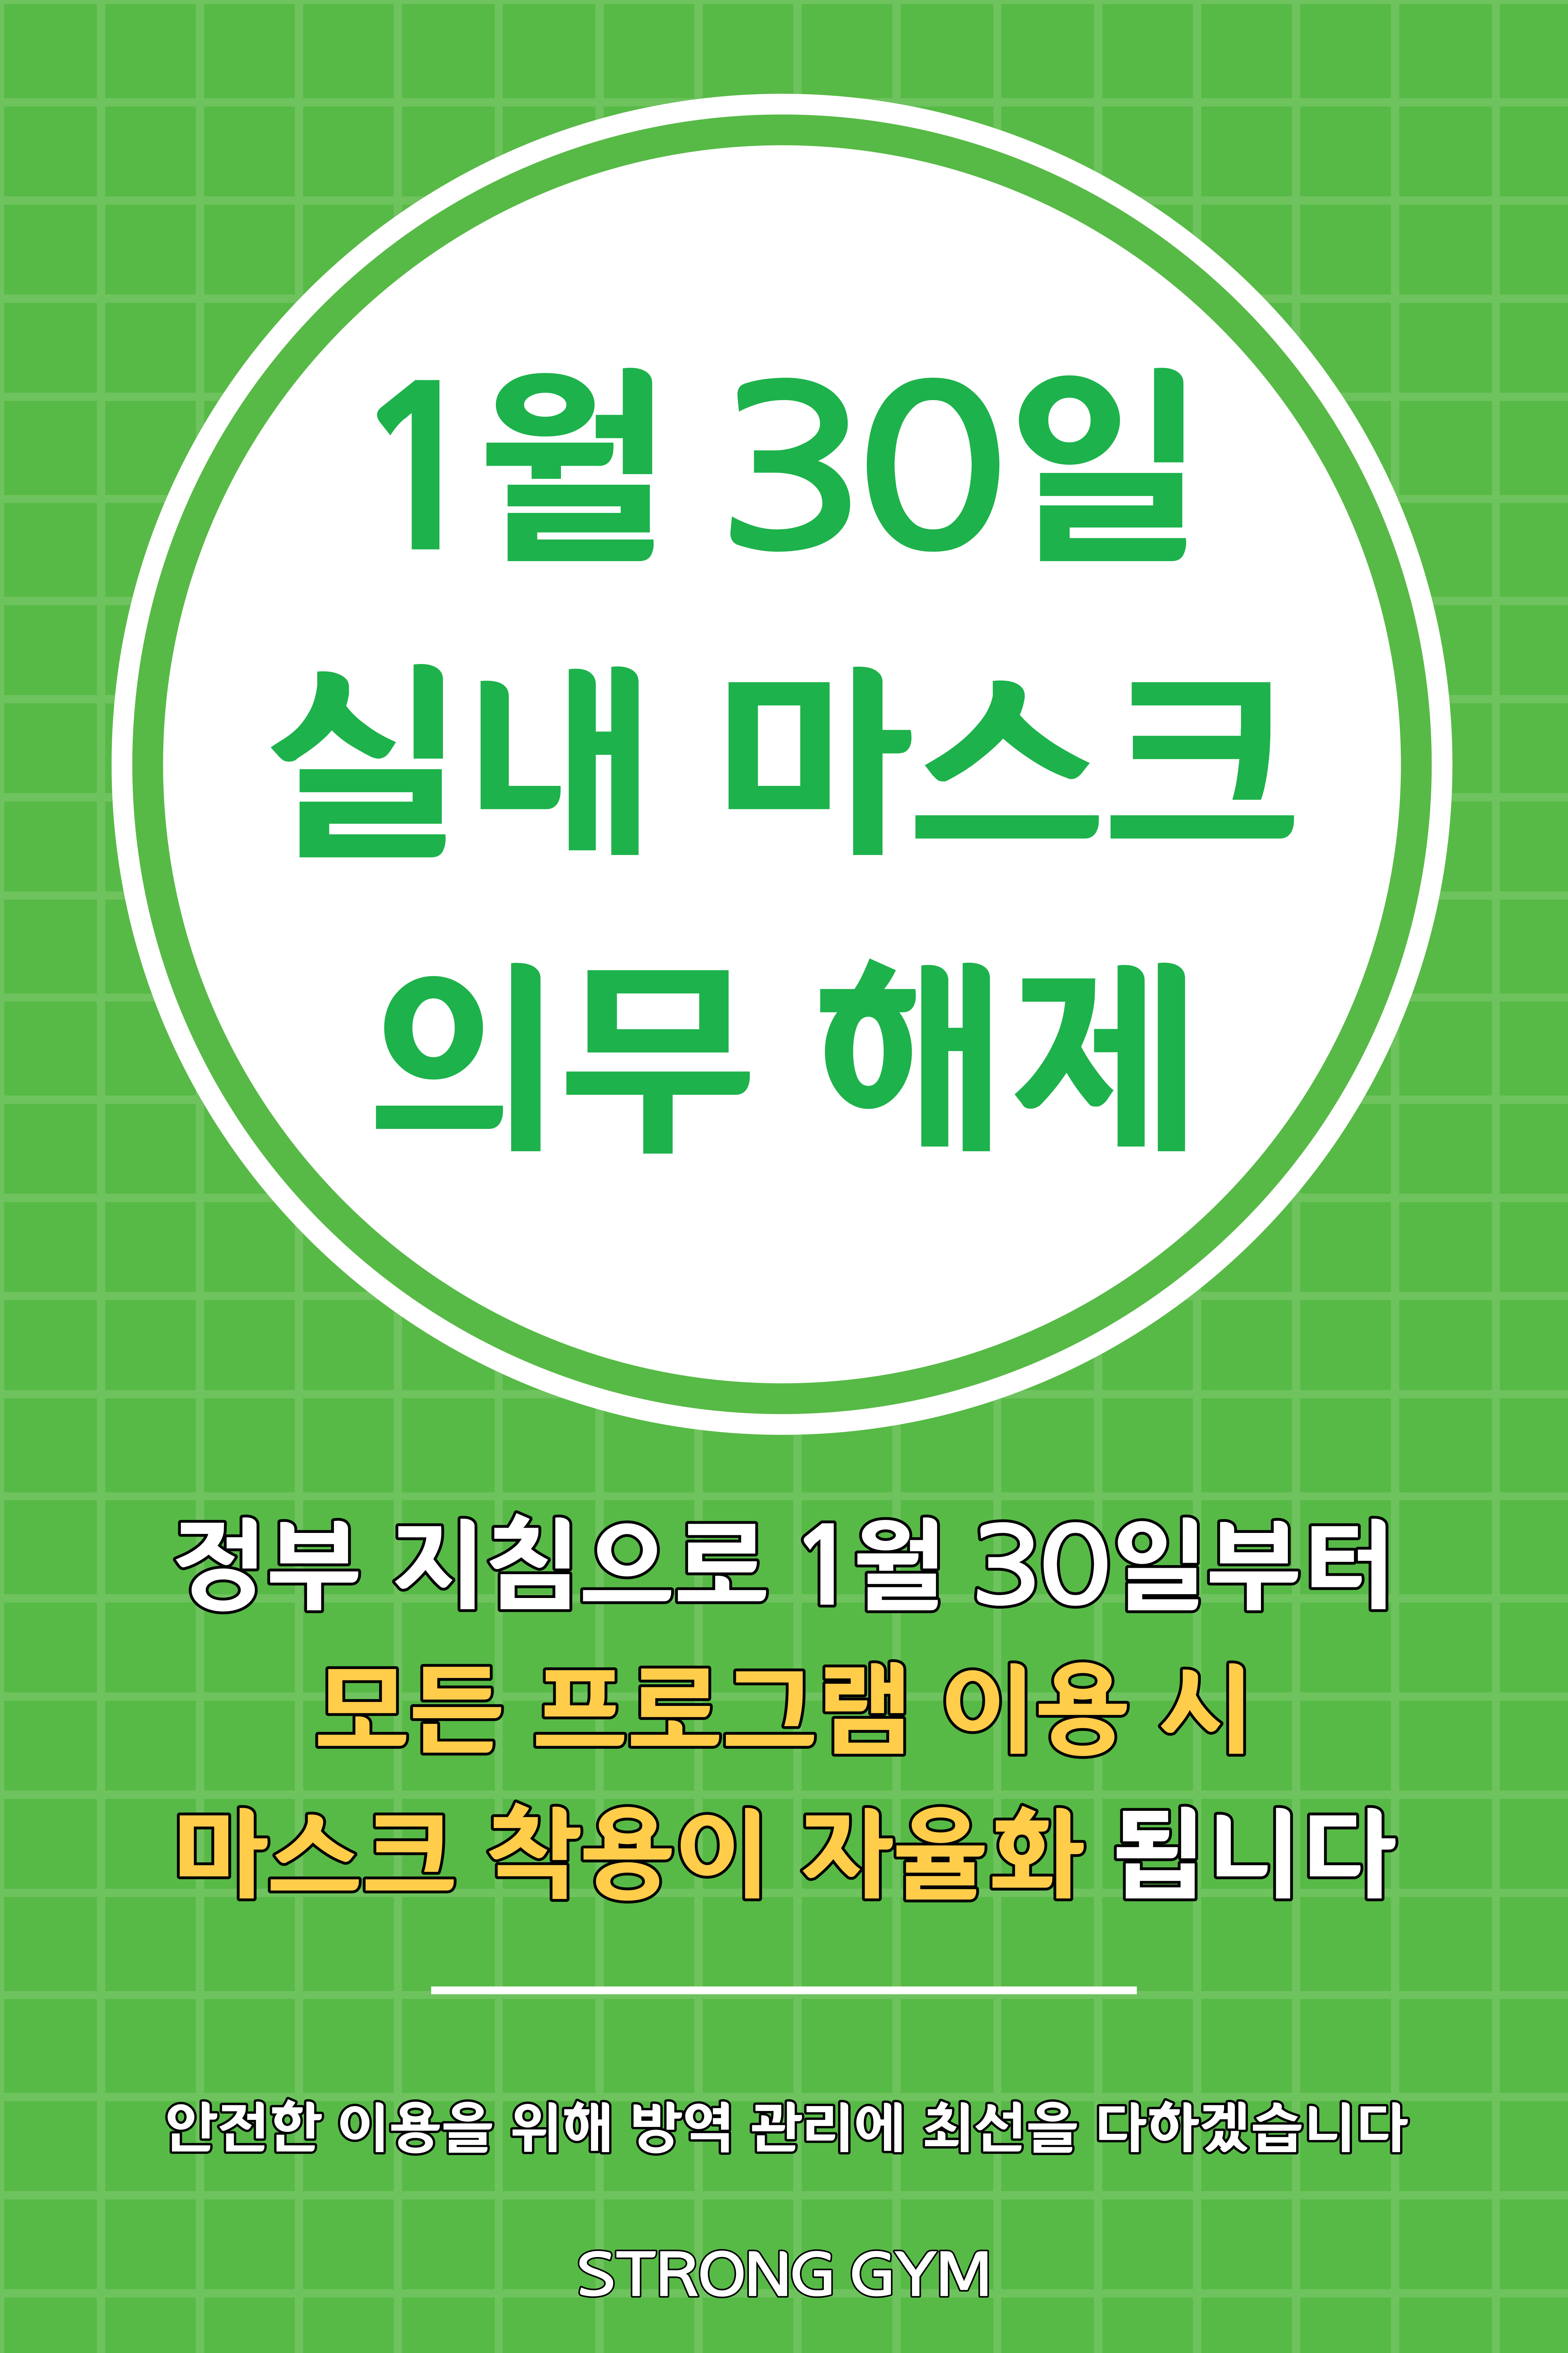 http://www.stronggym.co.kr/user/s/stronggym/editor/2301/a6e4b29585ae1ff21e53a8f1054d4117_1674708827_2037.jpg 이미지크게보기